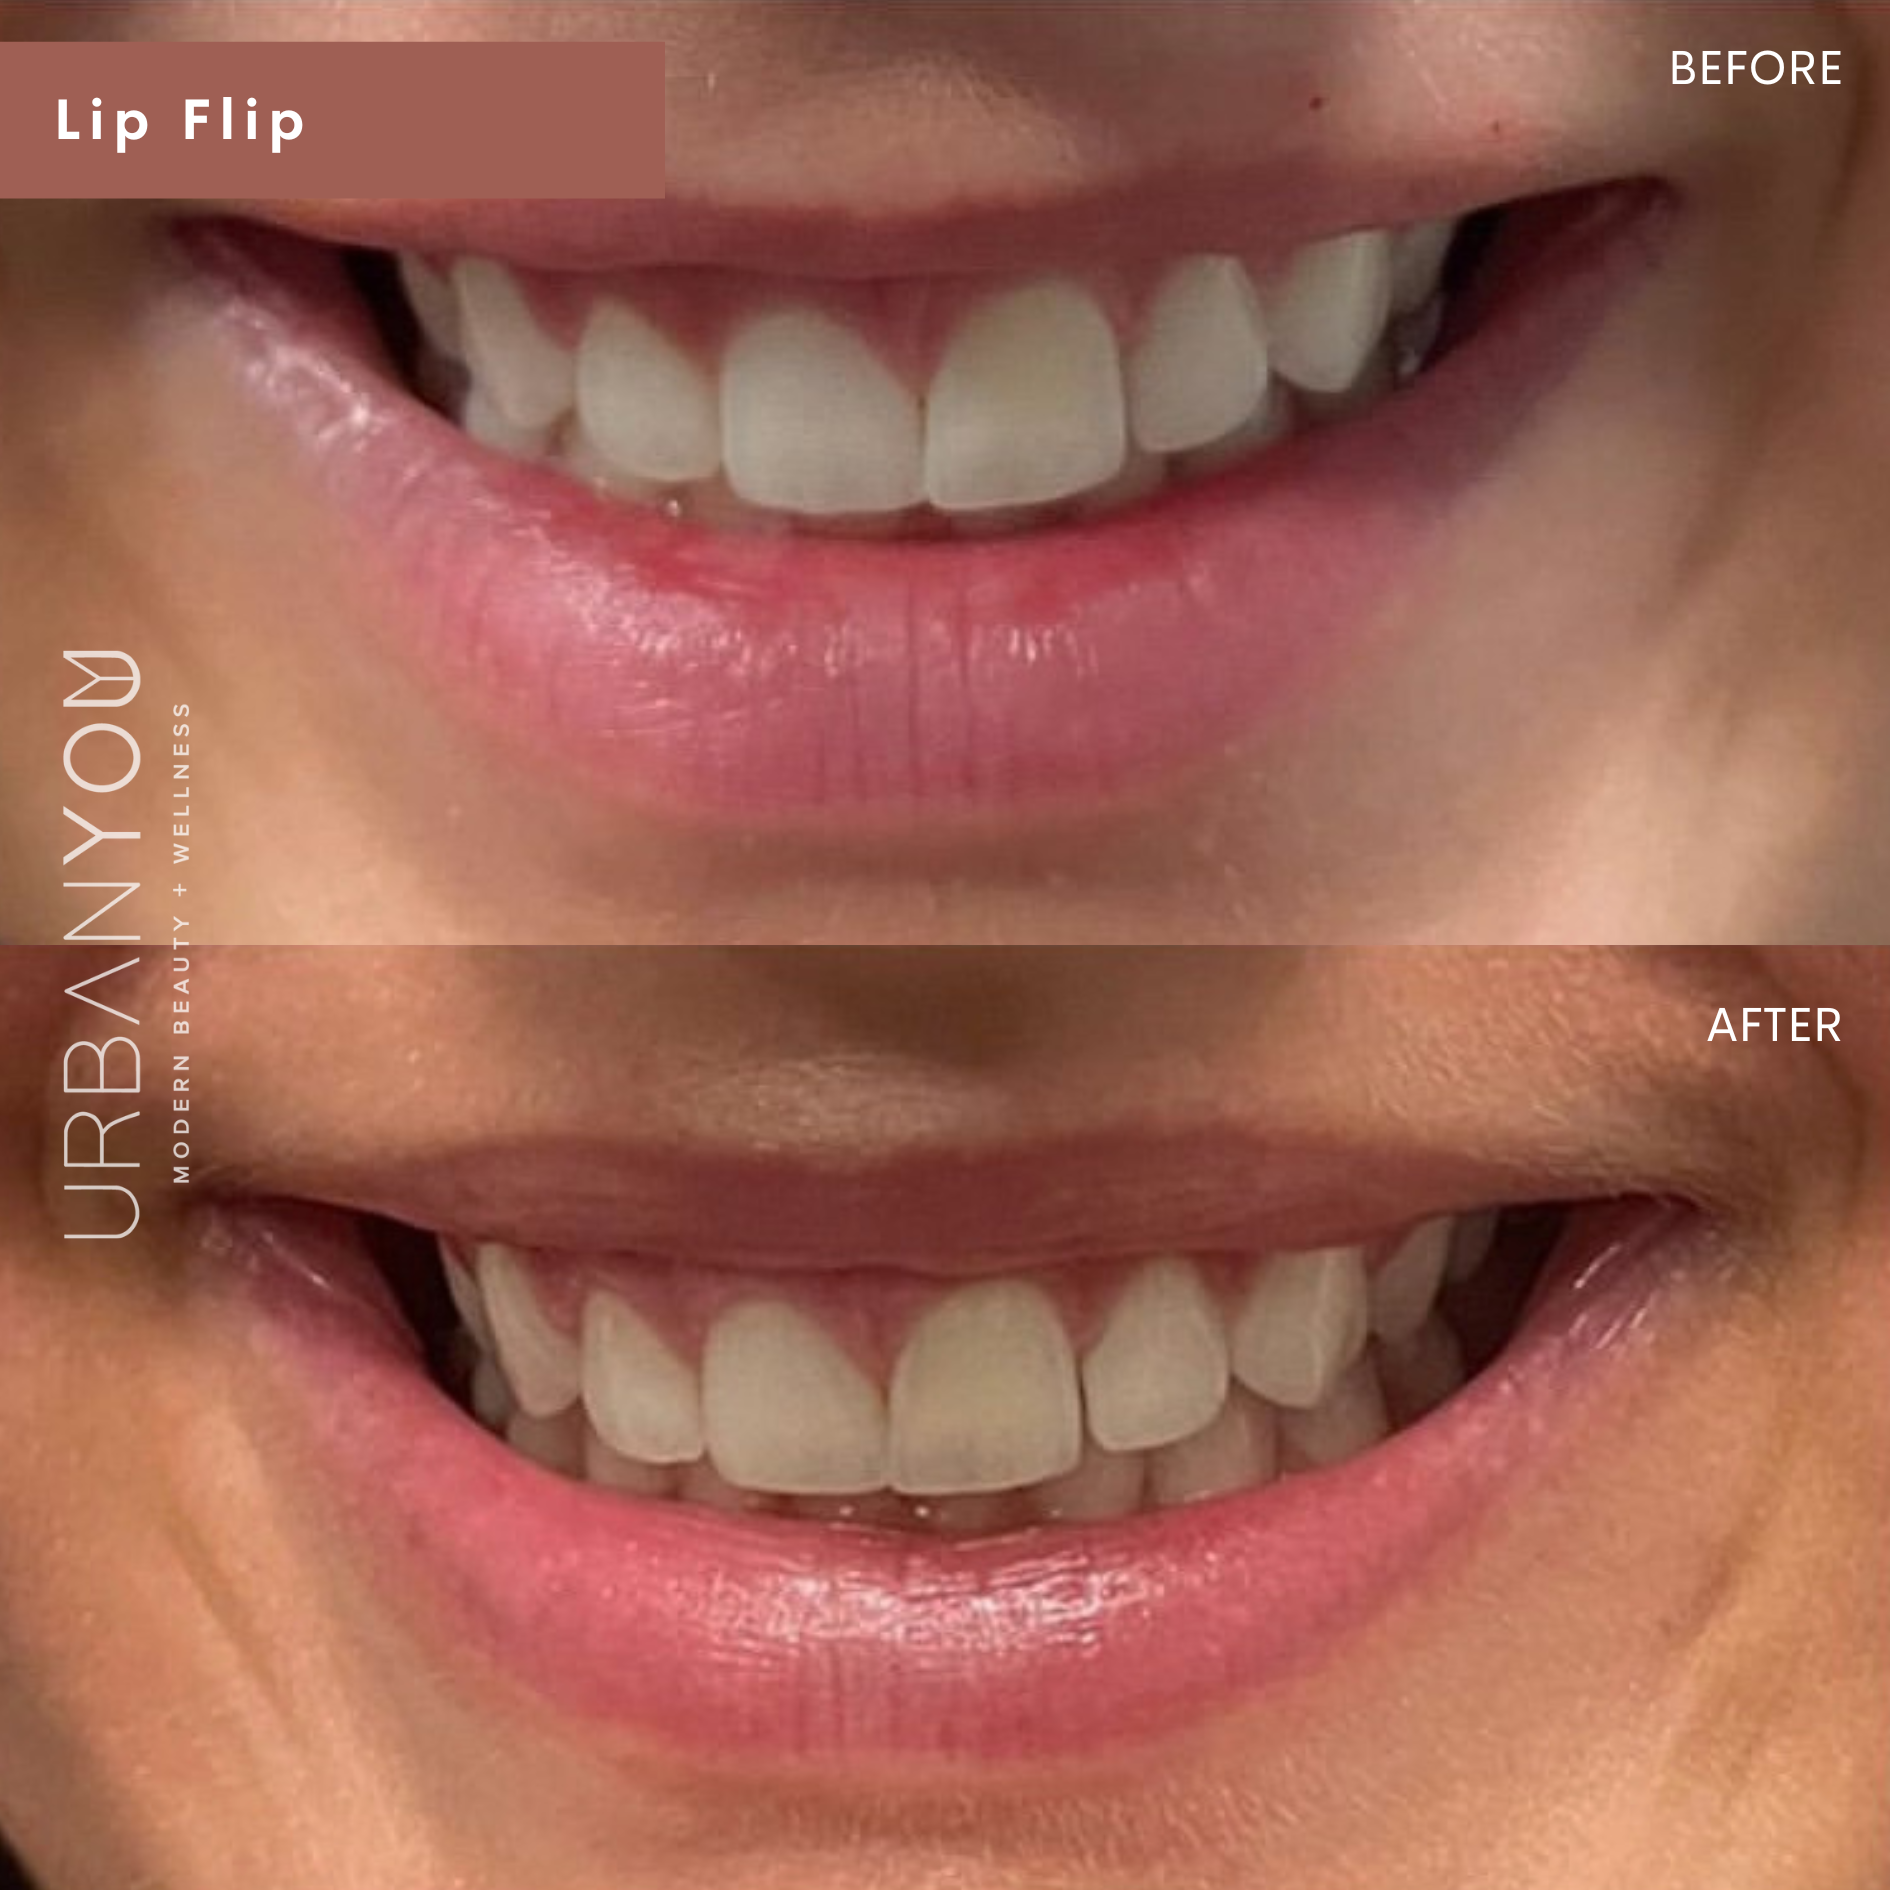 Lip flip with botox cosmetic before and after photo at urban you medical spa in northville and grand rapids michigan (Copy)